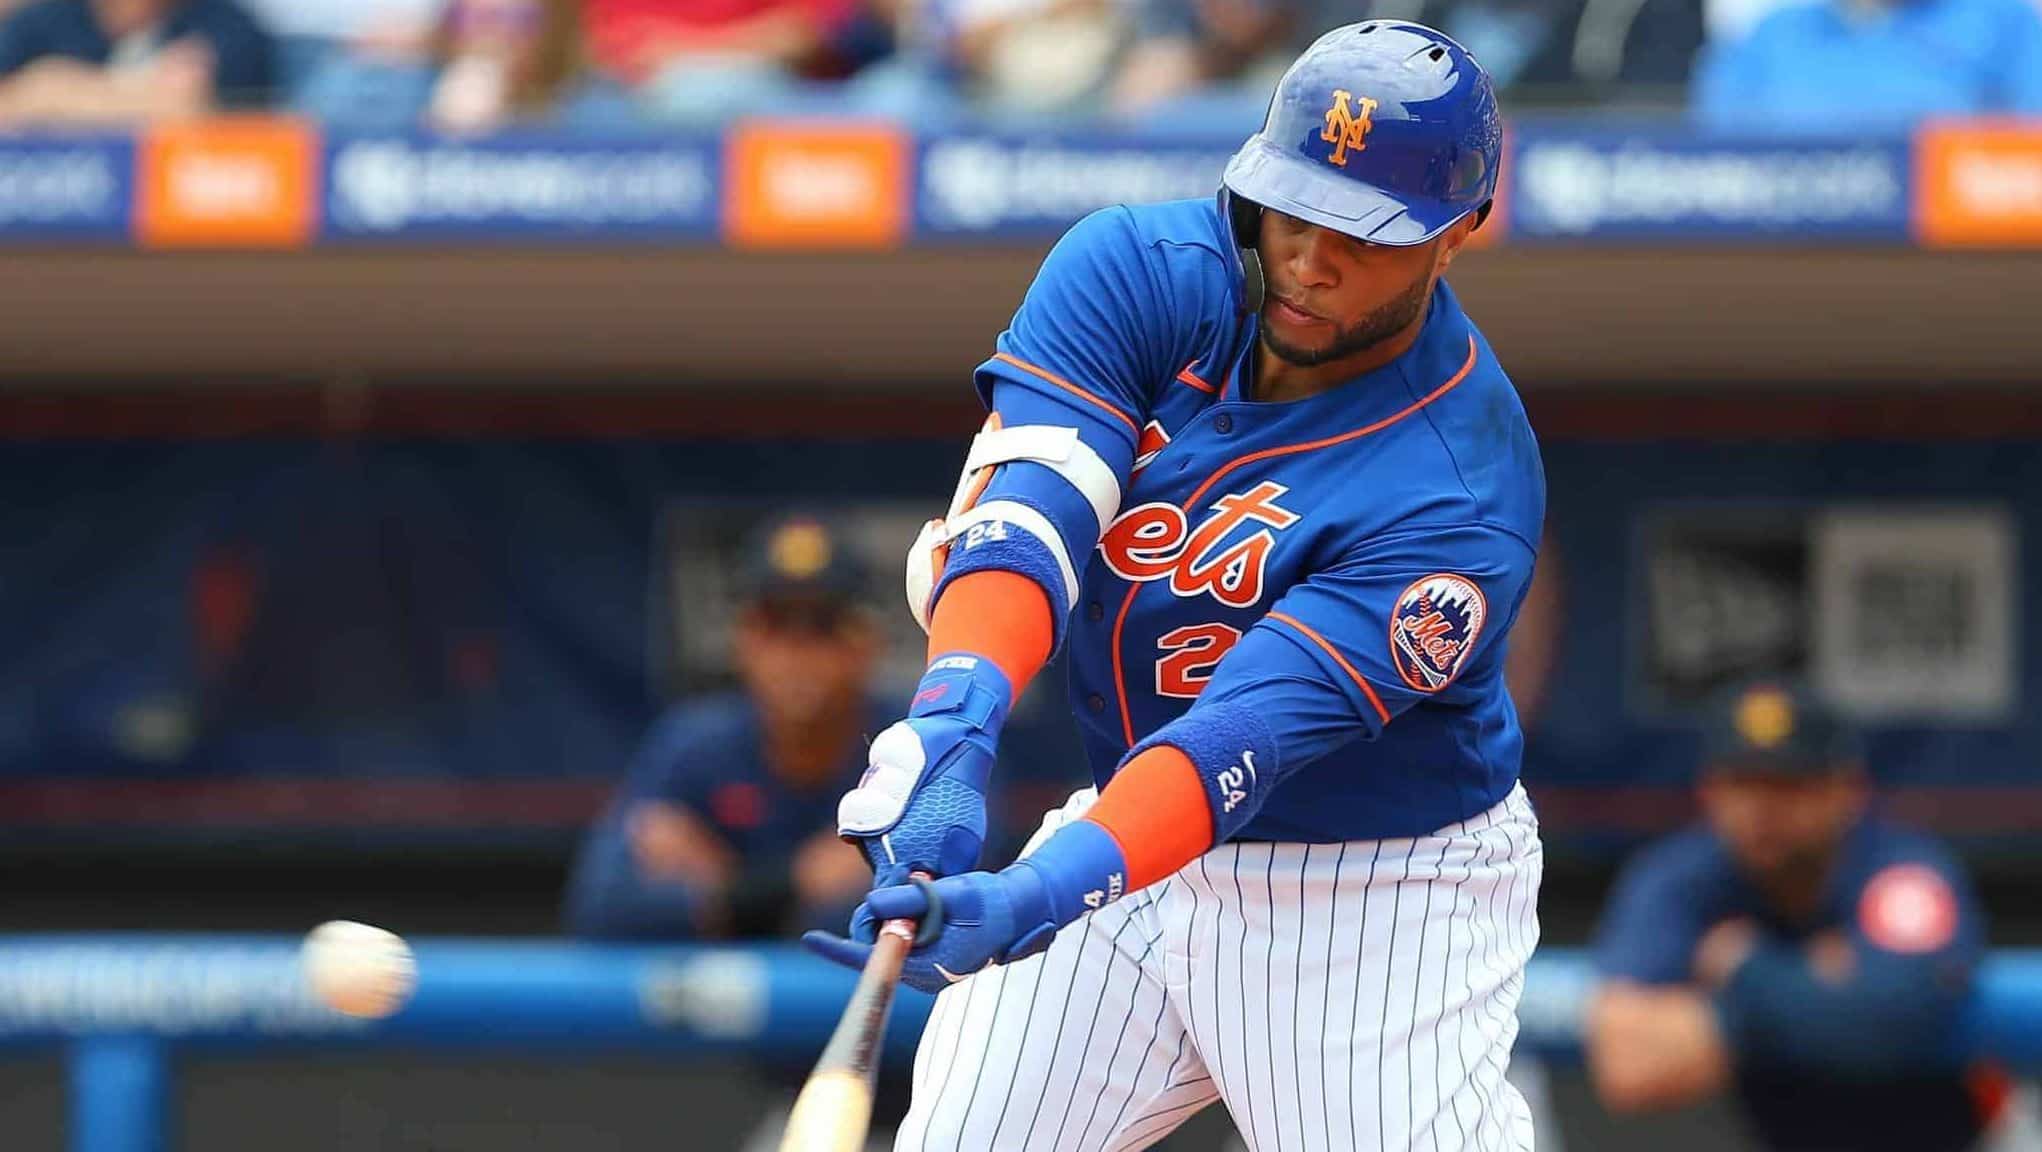 PORT ST. LUCIE, FL - MARCH 08: Robinson Cano #24 of the New York Mets hits a single against the Houston Astros during the first inning of a spring training baseball game at Clover Park on March 8, 2020 in Port St. Lucie, Florida. The Mets defeated the Astros 3-1.